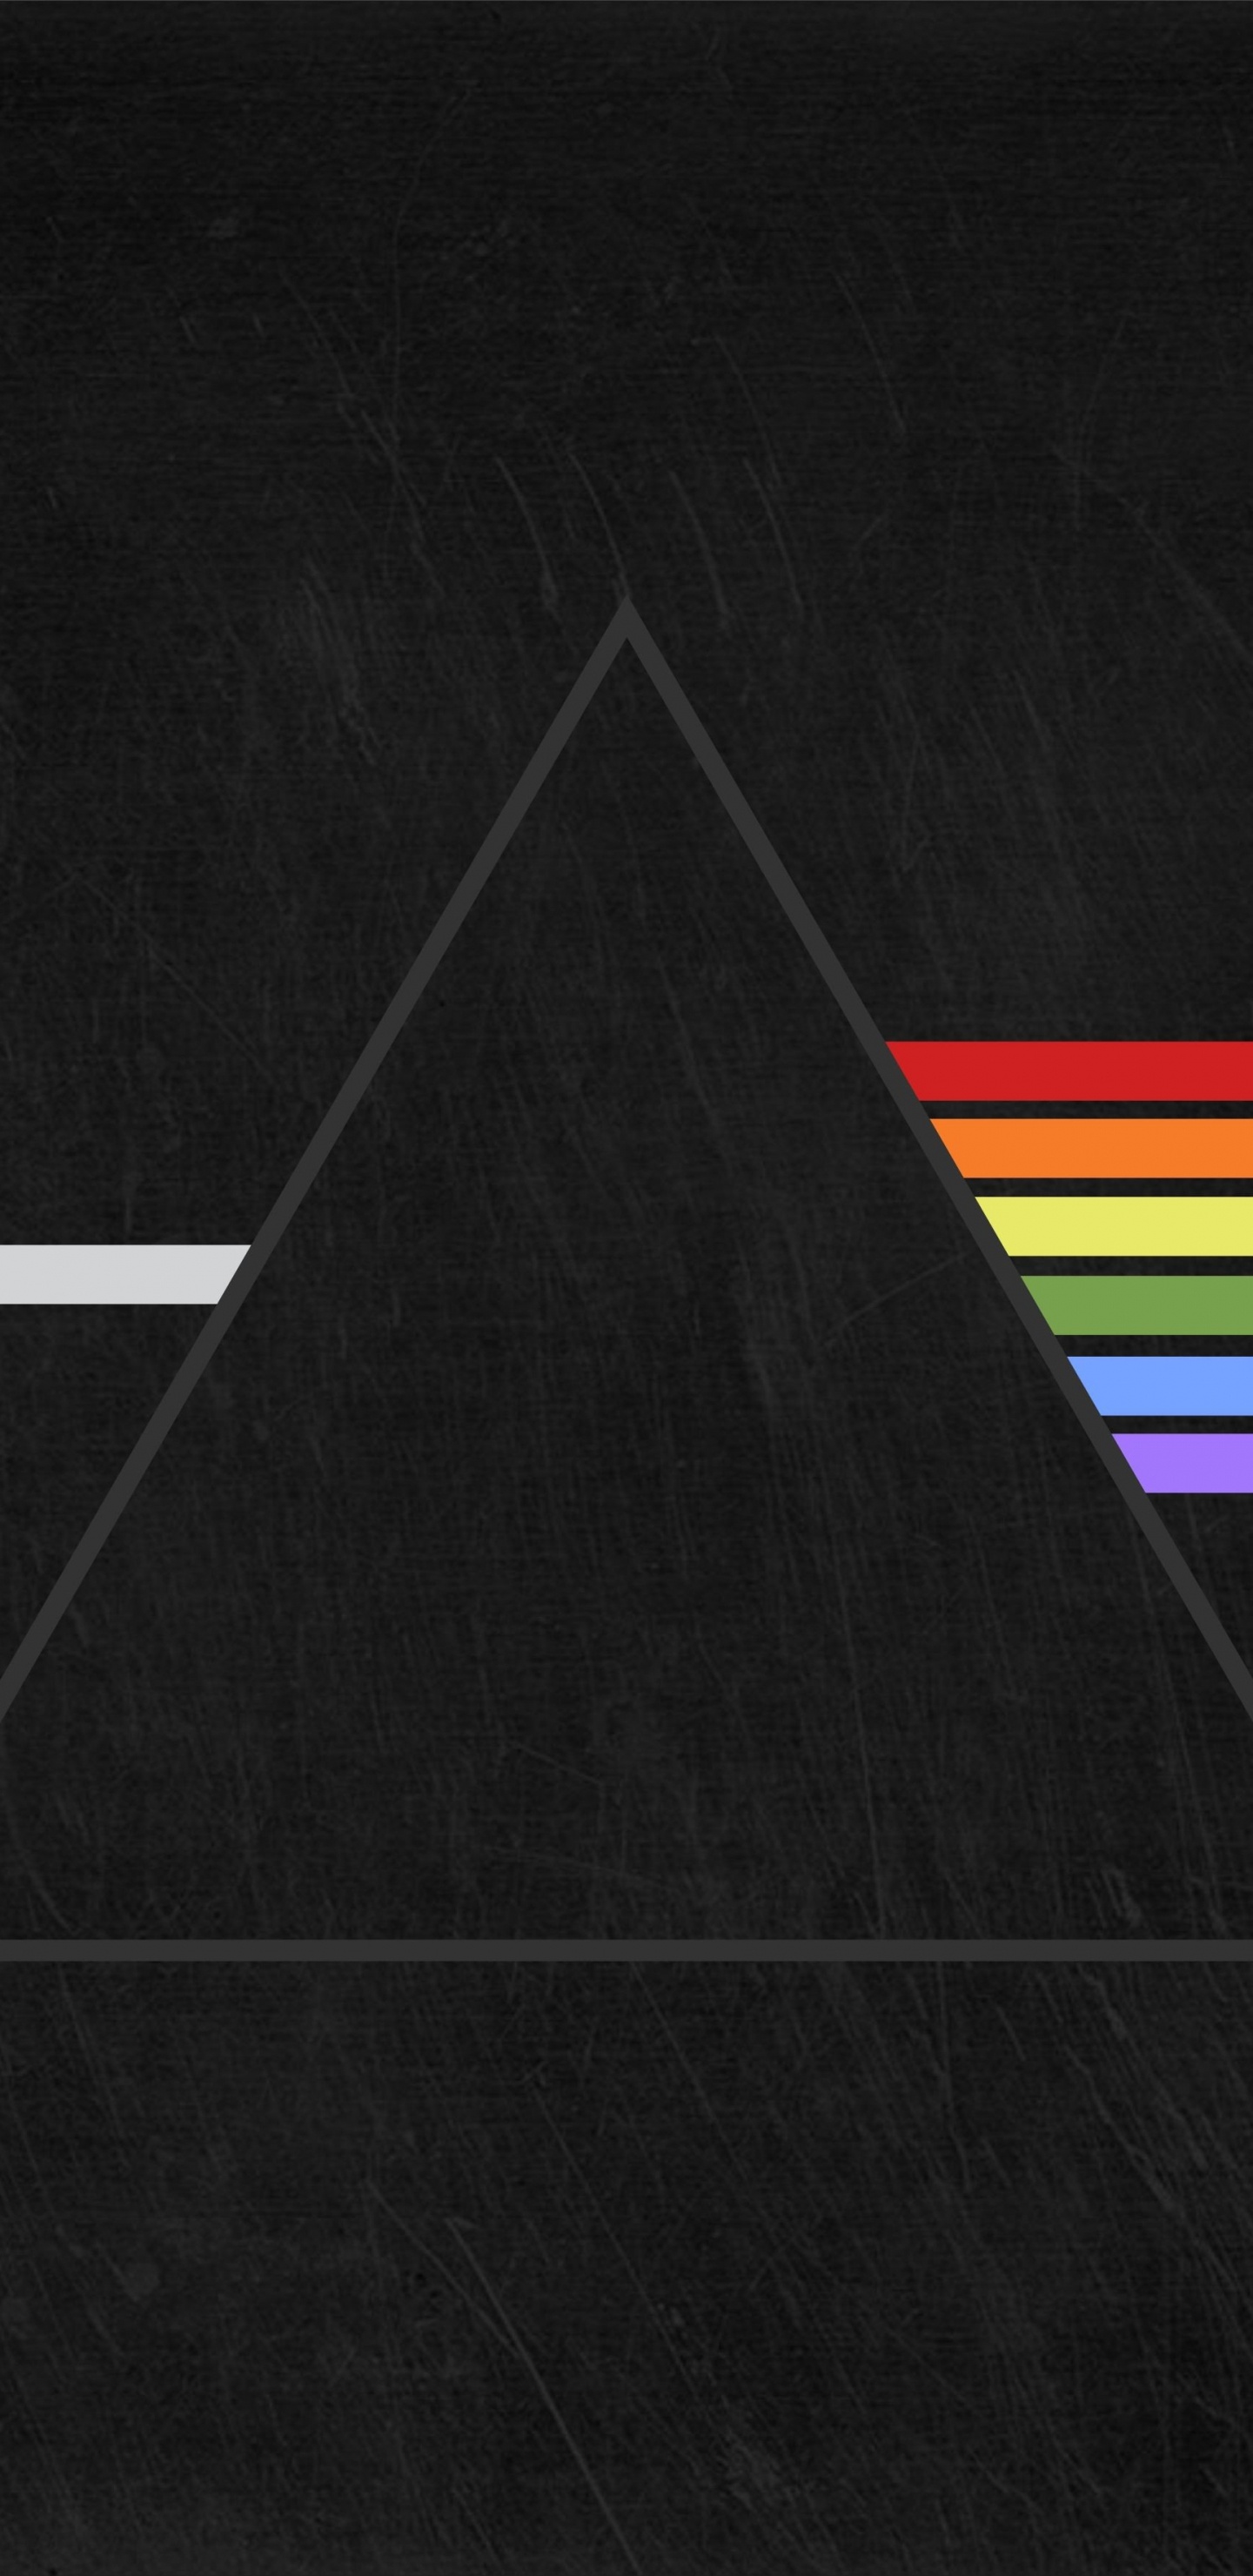 The Dark Side of The Moon, Pink Floyd, Prism, Black, Line. Wallpaper in 1440x2960 Resolution